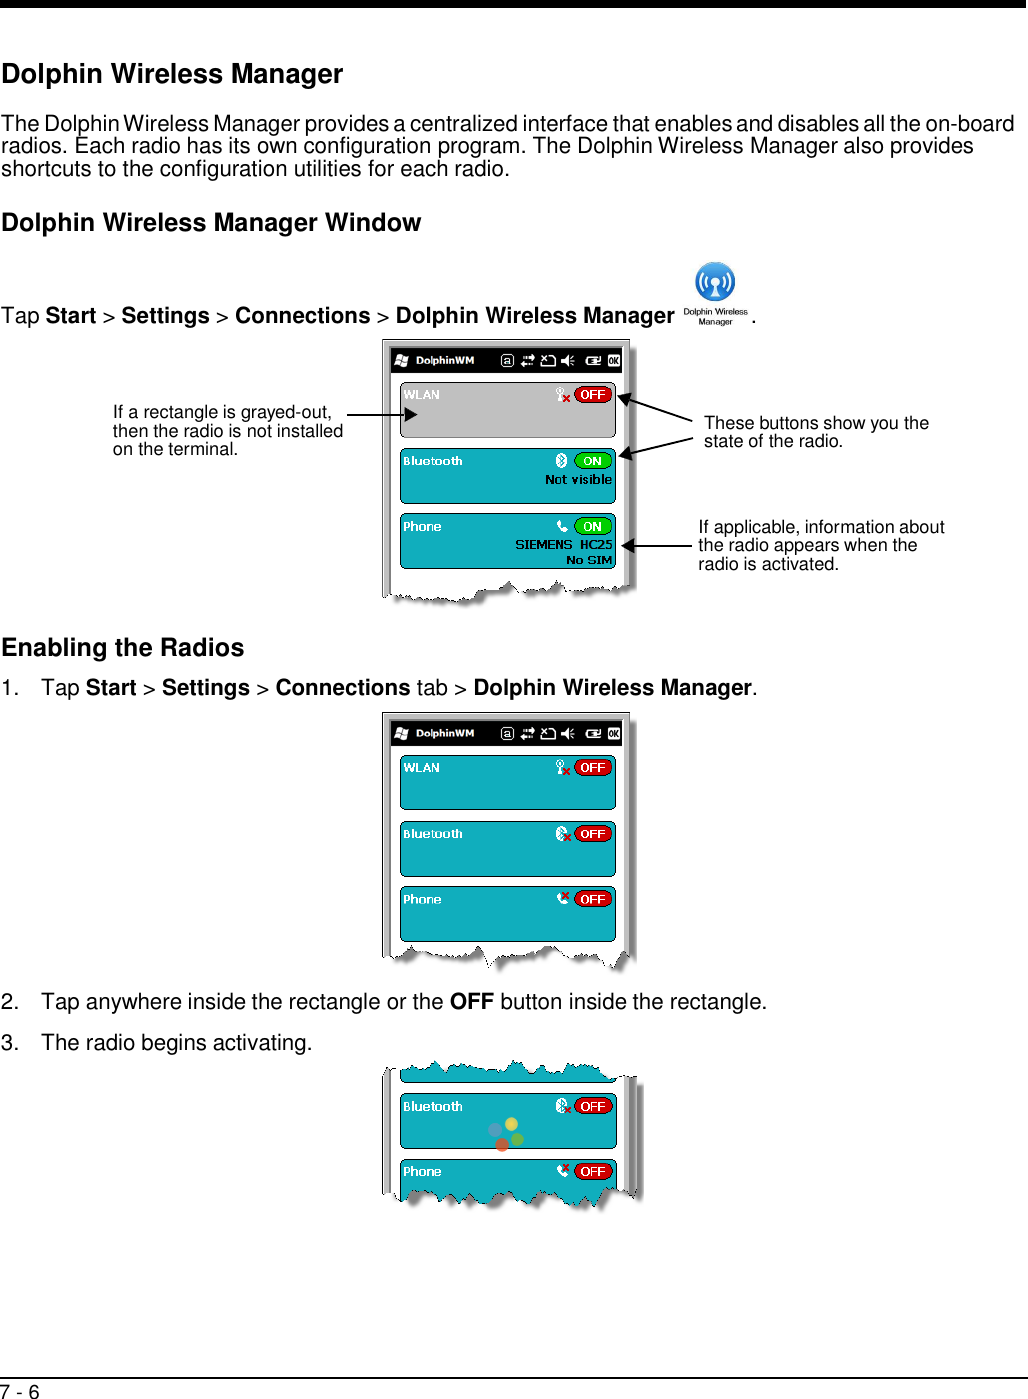 7 - 6       Dolphin Wireless Manager  The Dolphin Wireless Manager provides a centralized interface that enables and disables all the on-board radios. Each radio has its own configuration program. The Dolphin Wireless Manager also provides shortcuts to the configuration utilities for each radio.  Dolphin Wireless Manager Window    Tap Start &gt; Settings &gt; Connections &gt; Dolphin Wireless Manager  .     If a rectangle is grayed-out, then the radio is not installed on the terminal.  These buttons show you the state of the radio.    If applicable, information about the radio appears when the radio is activated.    Enabling the Radios  1.  Tap Start &gt; Settings &gt; Connections tab &gt; Dolphin Wireless Manager.    2.  Tap anywhere inside the rectangle or the OFF button inside the rectangle.  3.  The radio begins activating.  